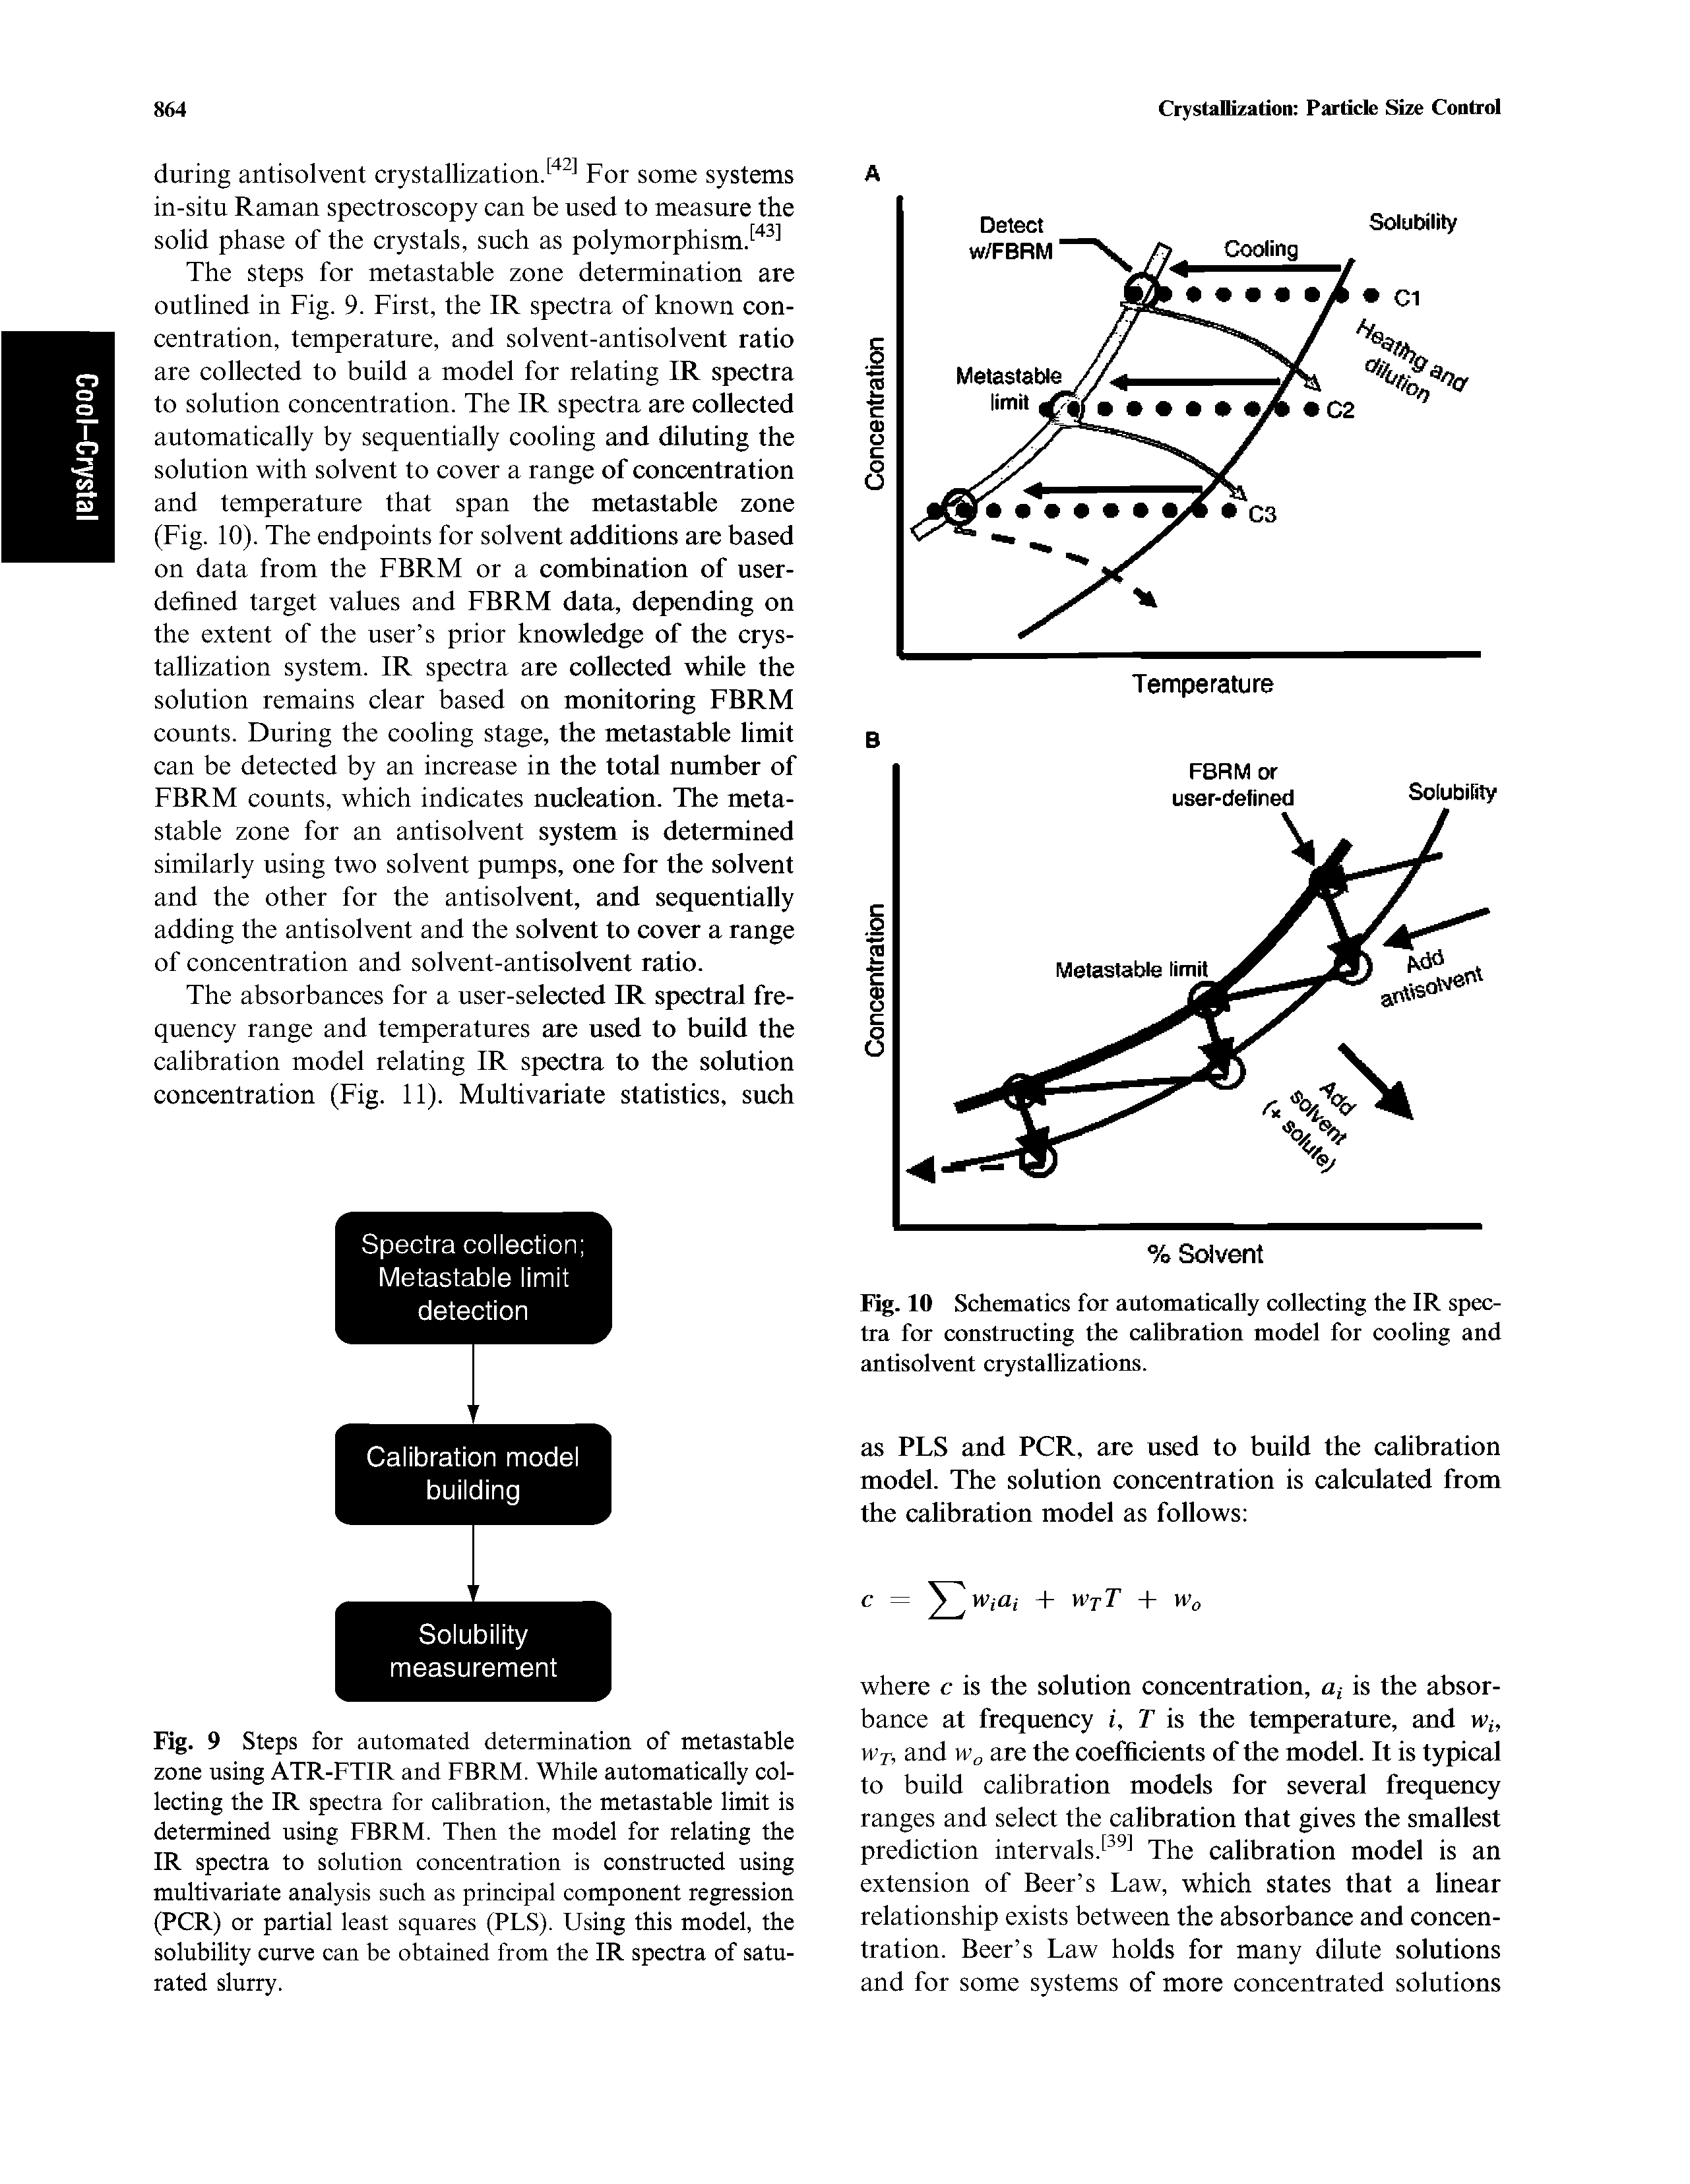 Fig. 9 Steps for automated determination of metastable zone using ATR-FTIR and FBRM. While automatically collecting the IR spectra for calibration, the metastable limit is determined using FBRM. Then the model for relating the IR spectra to solution concentration is constructed using multivariate analysis such as principal component regression (PCR) or partial least squares (PLS). Using this model, the solubility curve can be obtained from the IR spectra of saturated slurry.